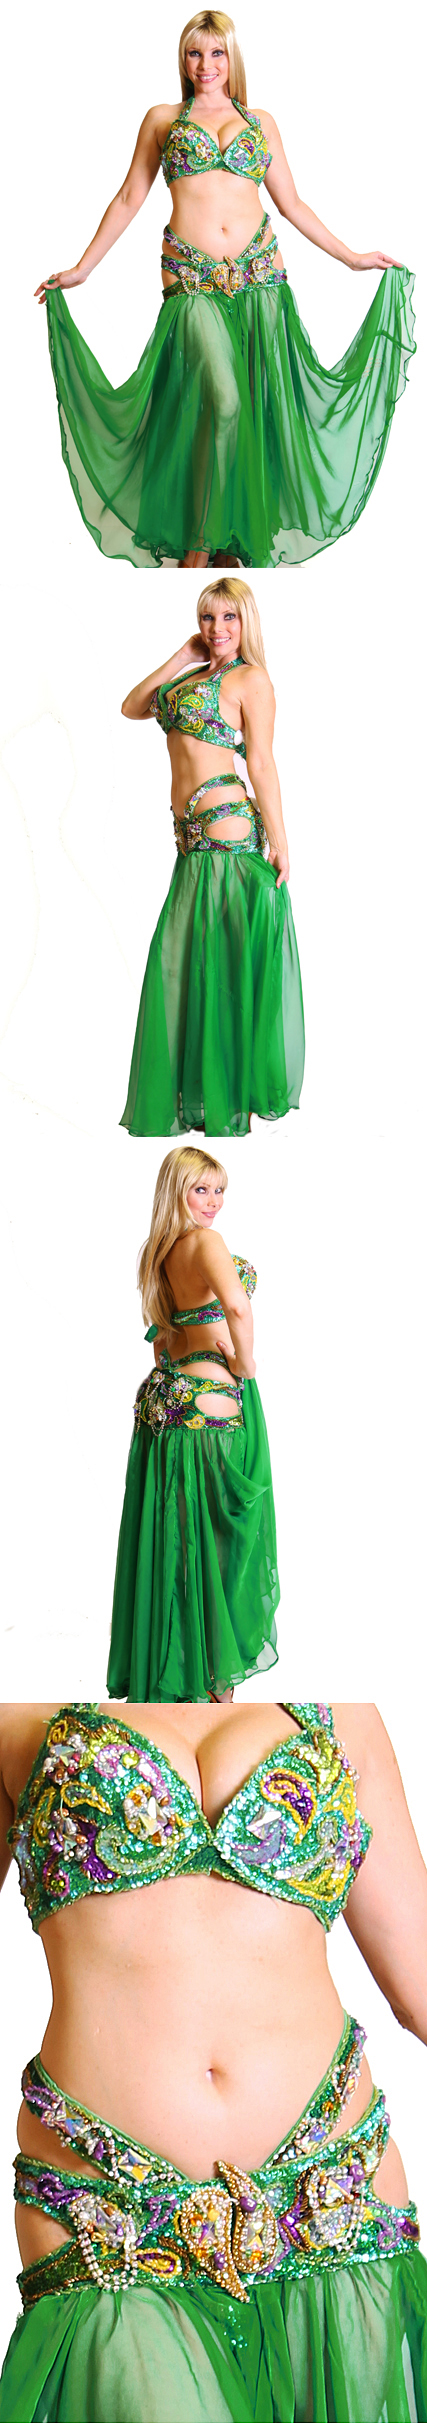 Two Piece Costume (20099) 